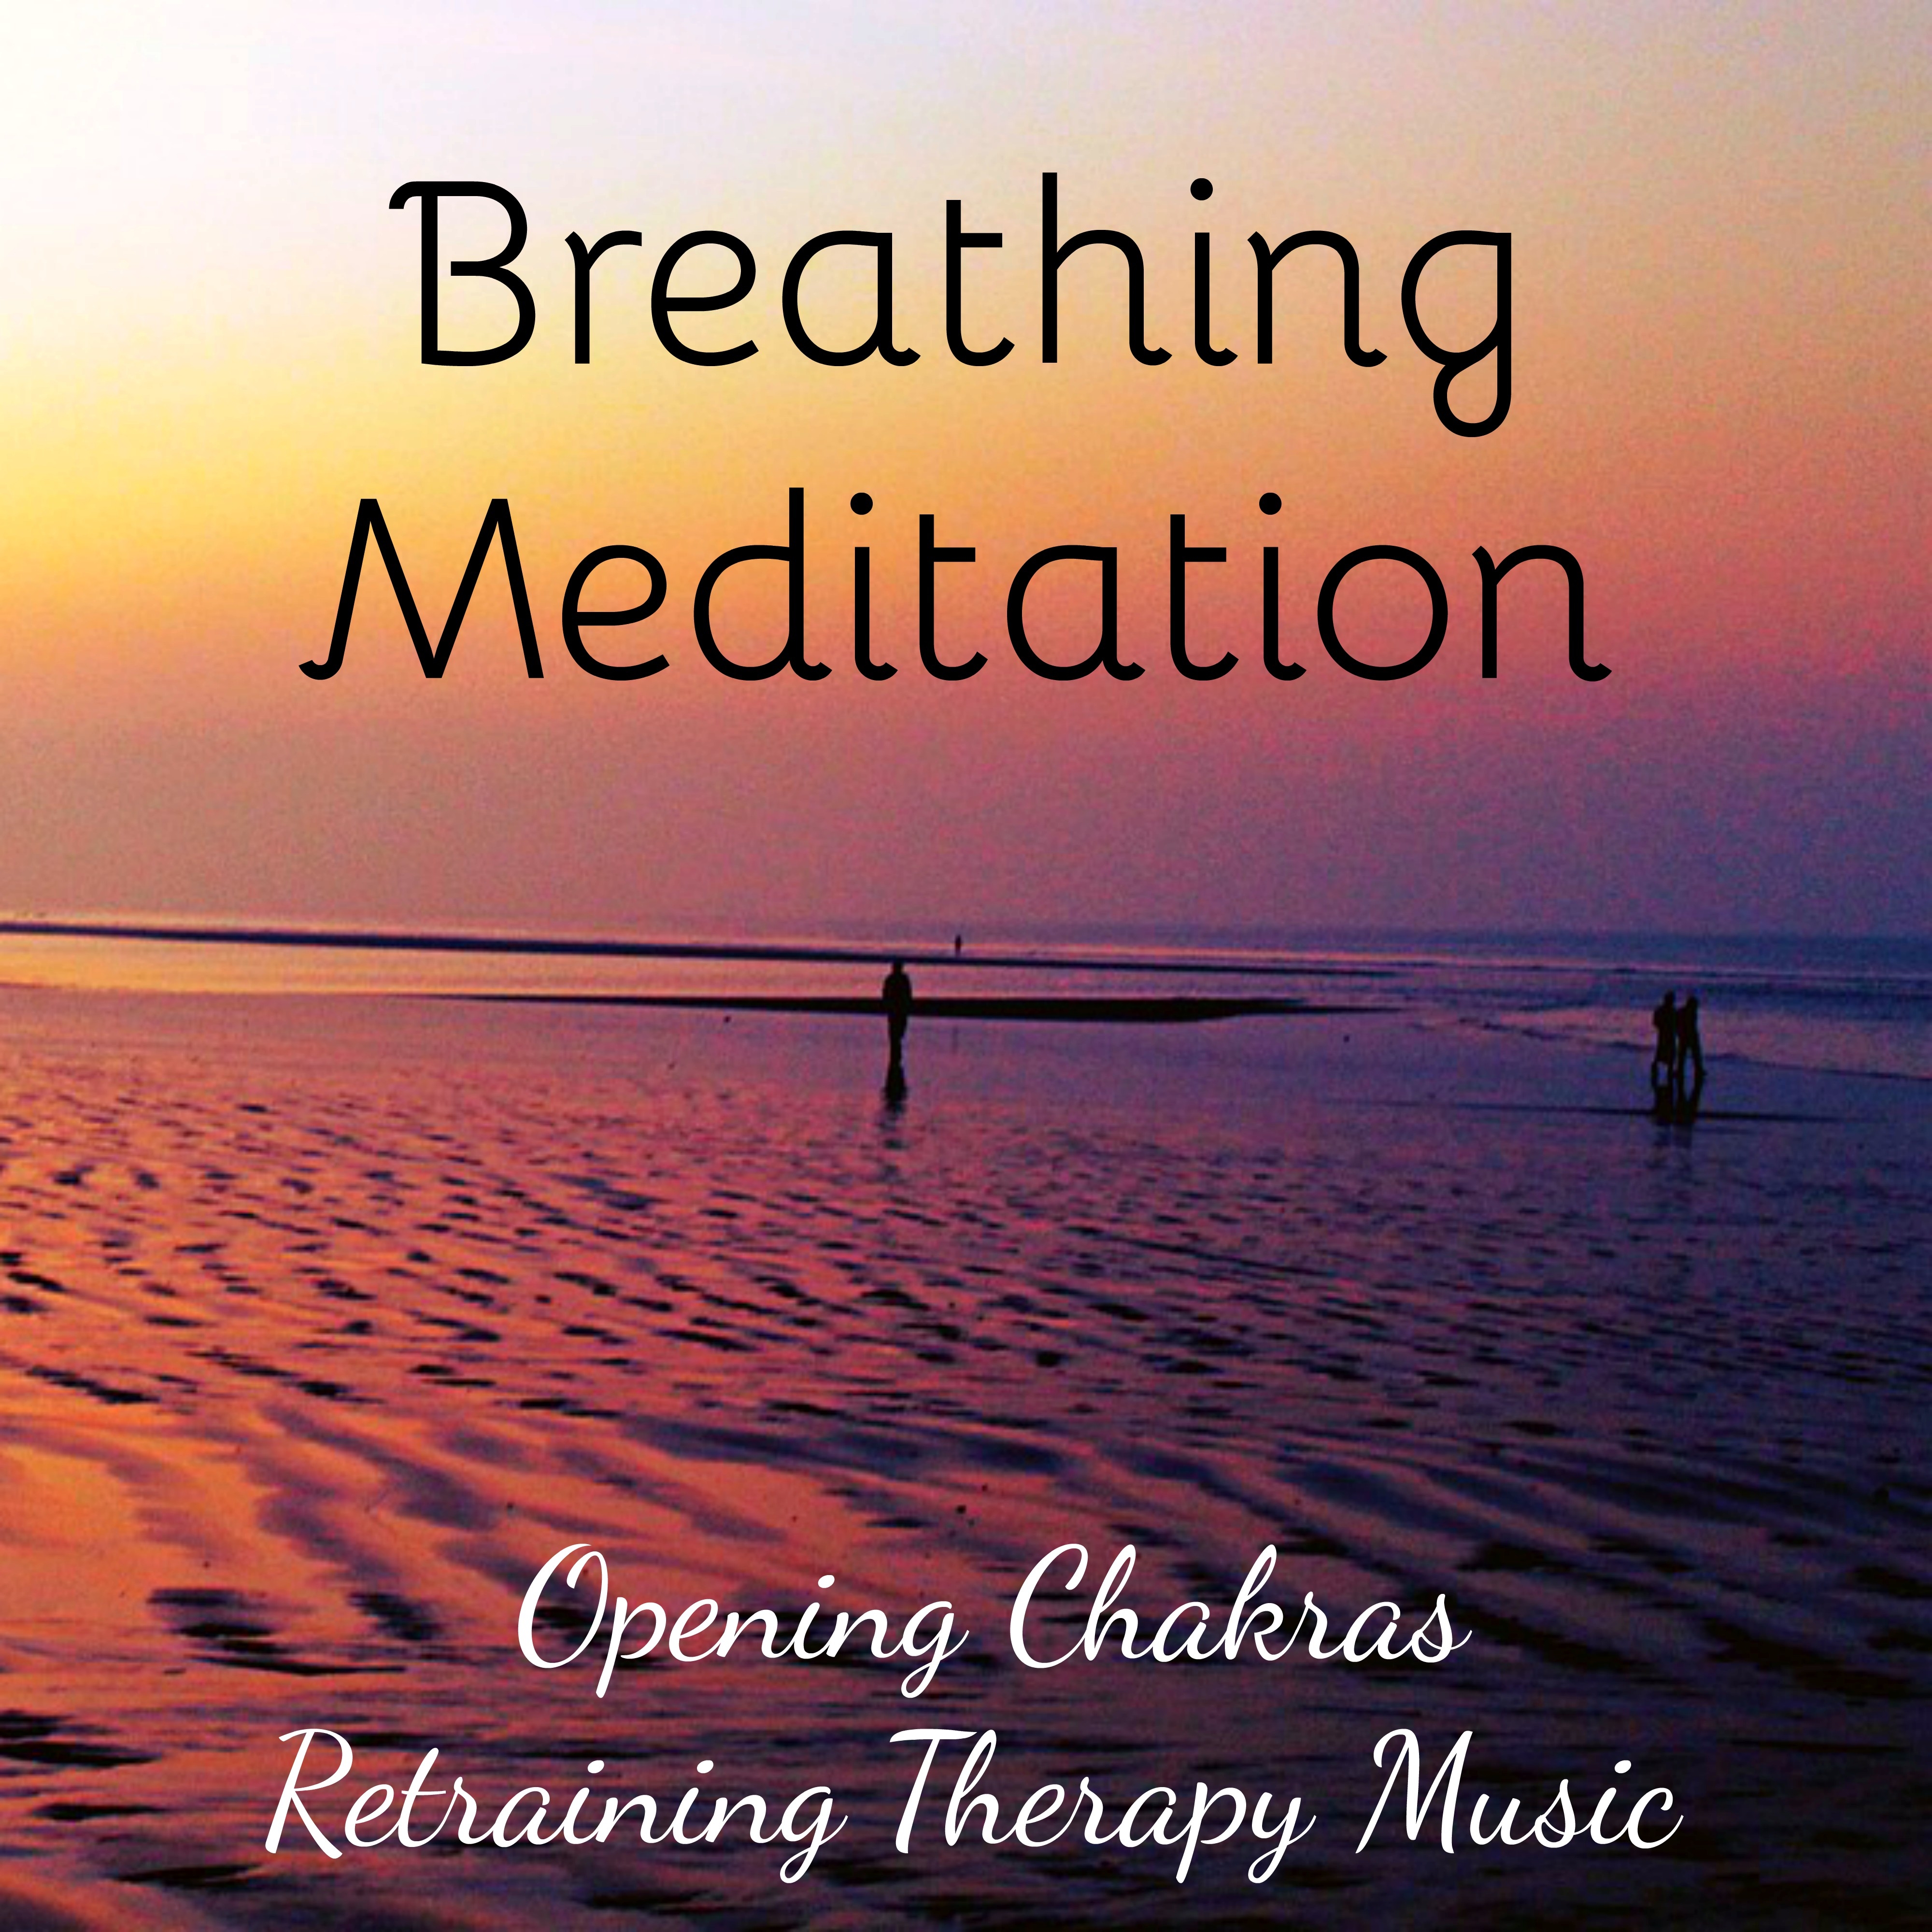 Breathing Meditation - Opening Chakras Retraining Therapy Music with Mindfulness Peaceful Sleep Sounds